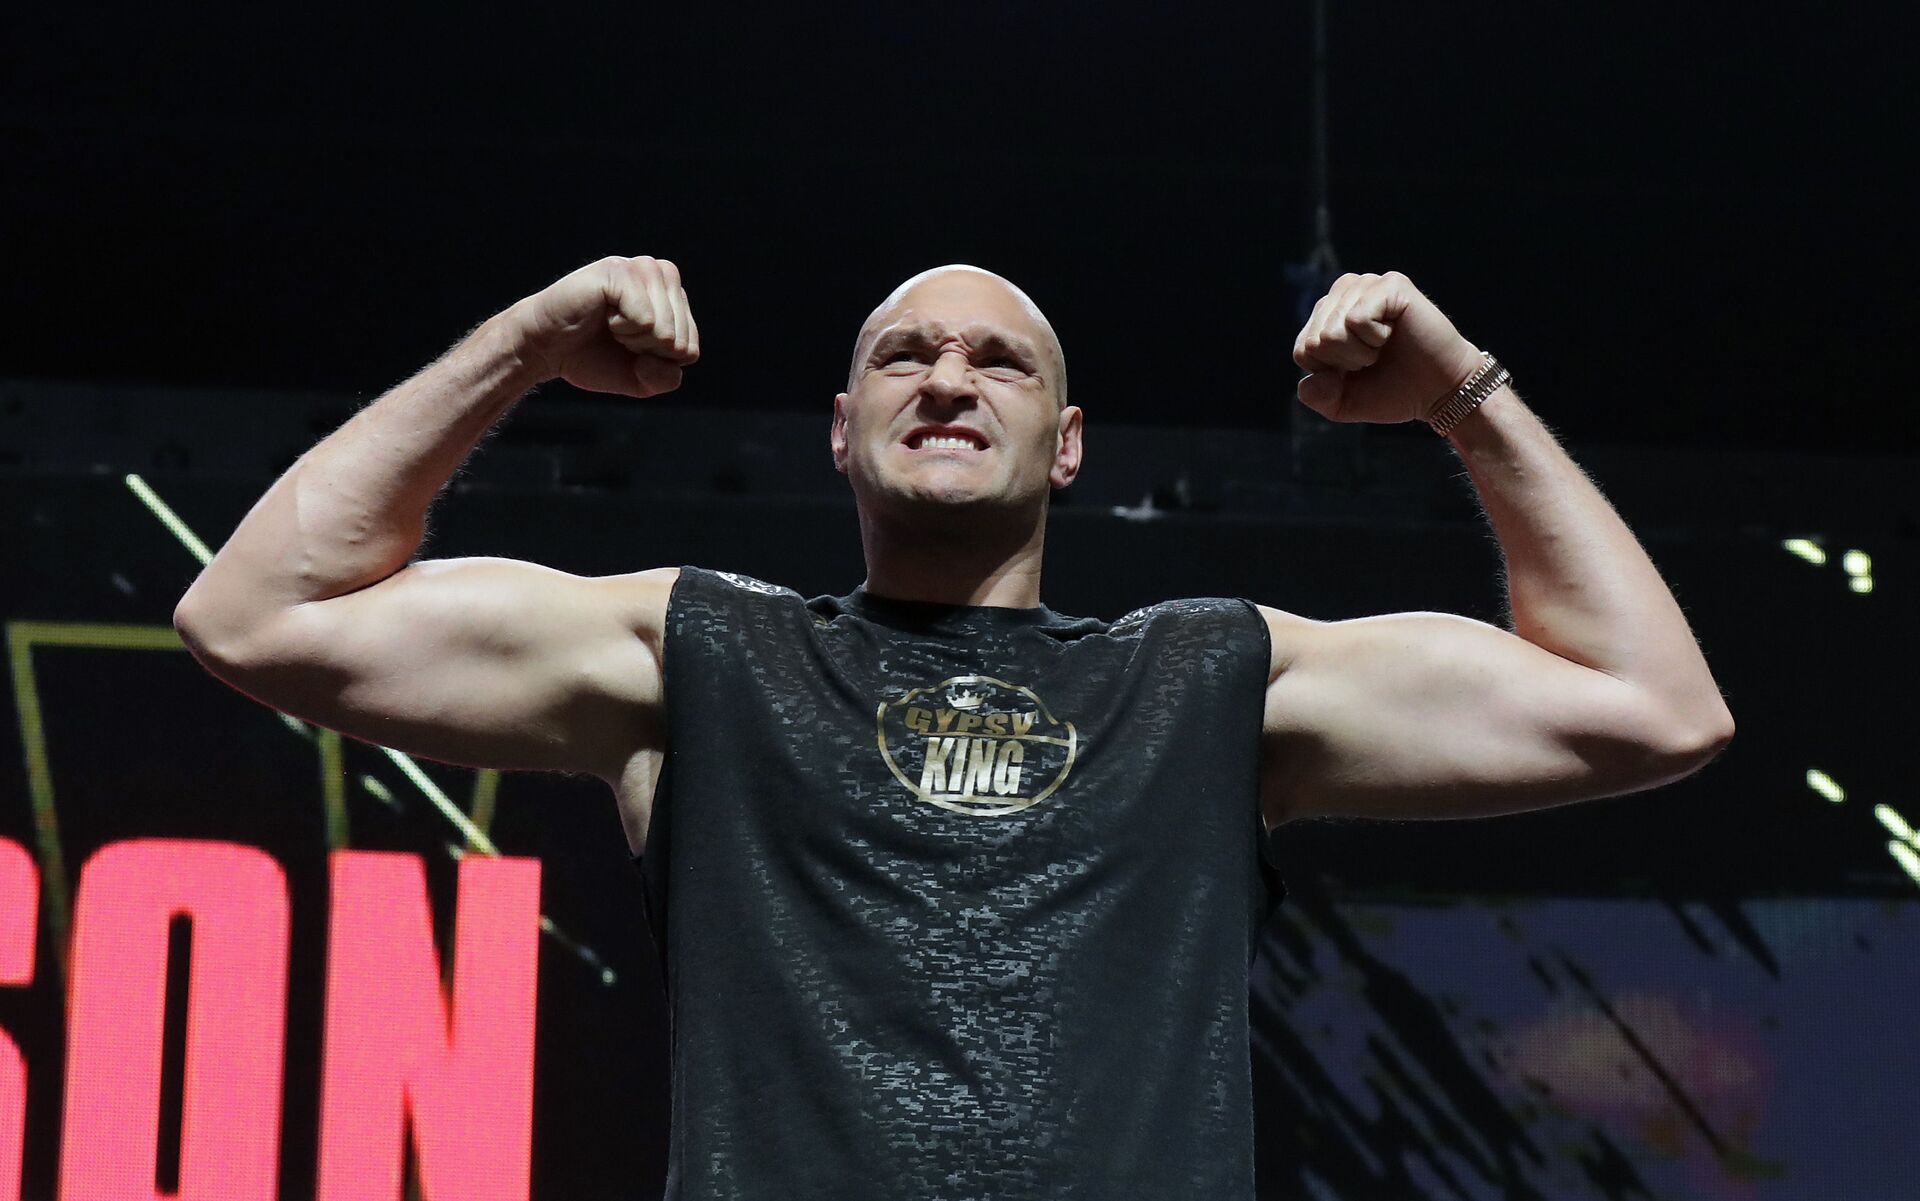 In this Feb. 21, 2020, file photo, Tyson Fury, of England, stands on the scale during a weigh-in for his WBC heavyweight championship boxing match against Deontay Wilder, in Las Vegas. - Sputnik International, 1920, 23.09.2021